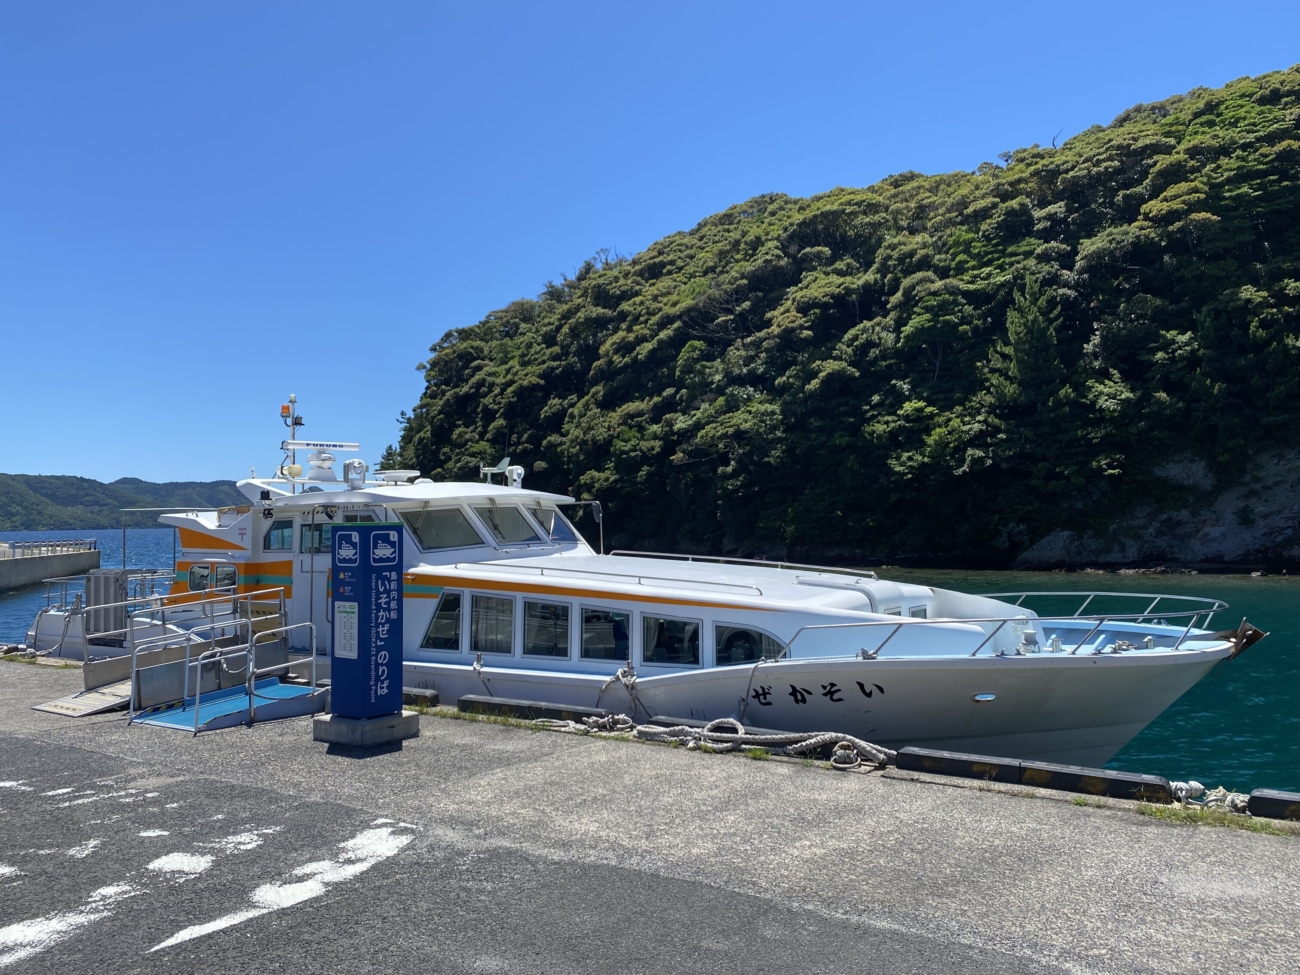 A Guide to Island Hopping in the Dōzen Area